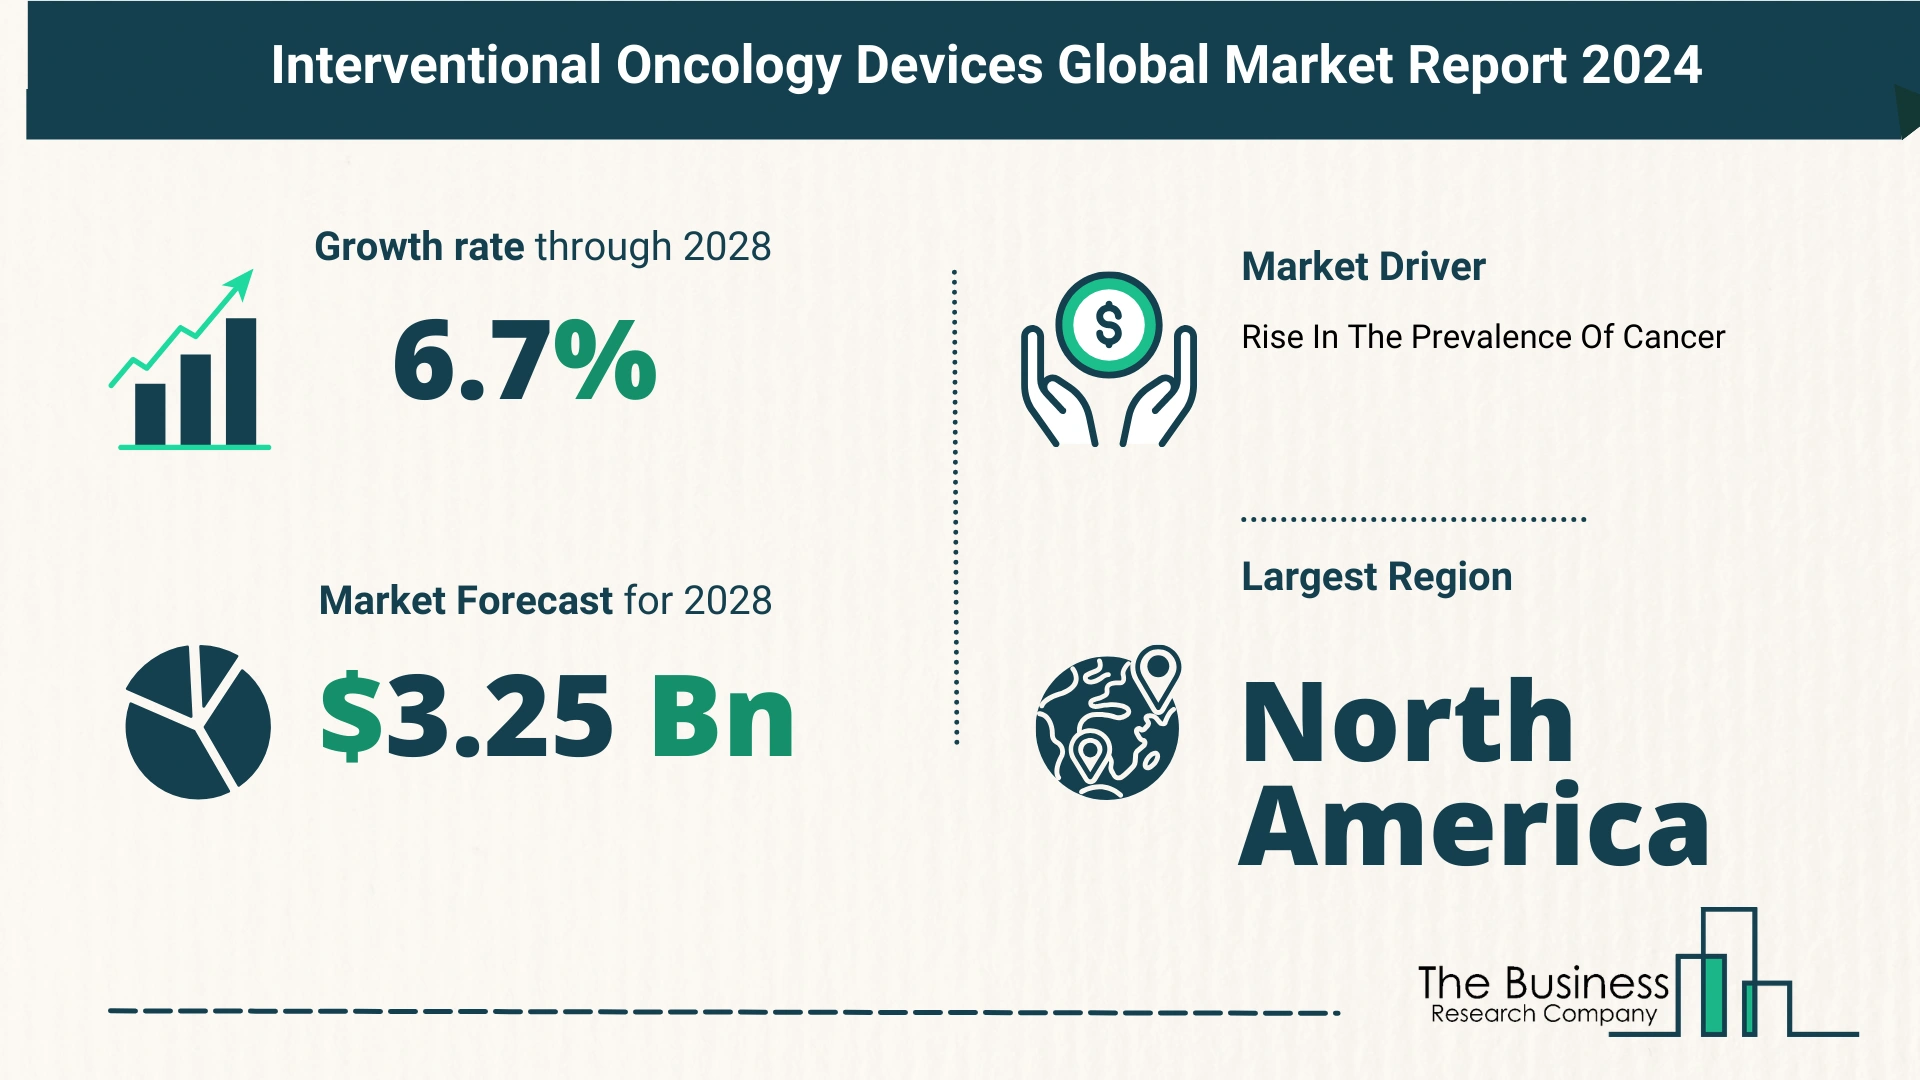 Global Interventional Oncology Devices Market Size